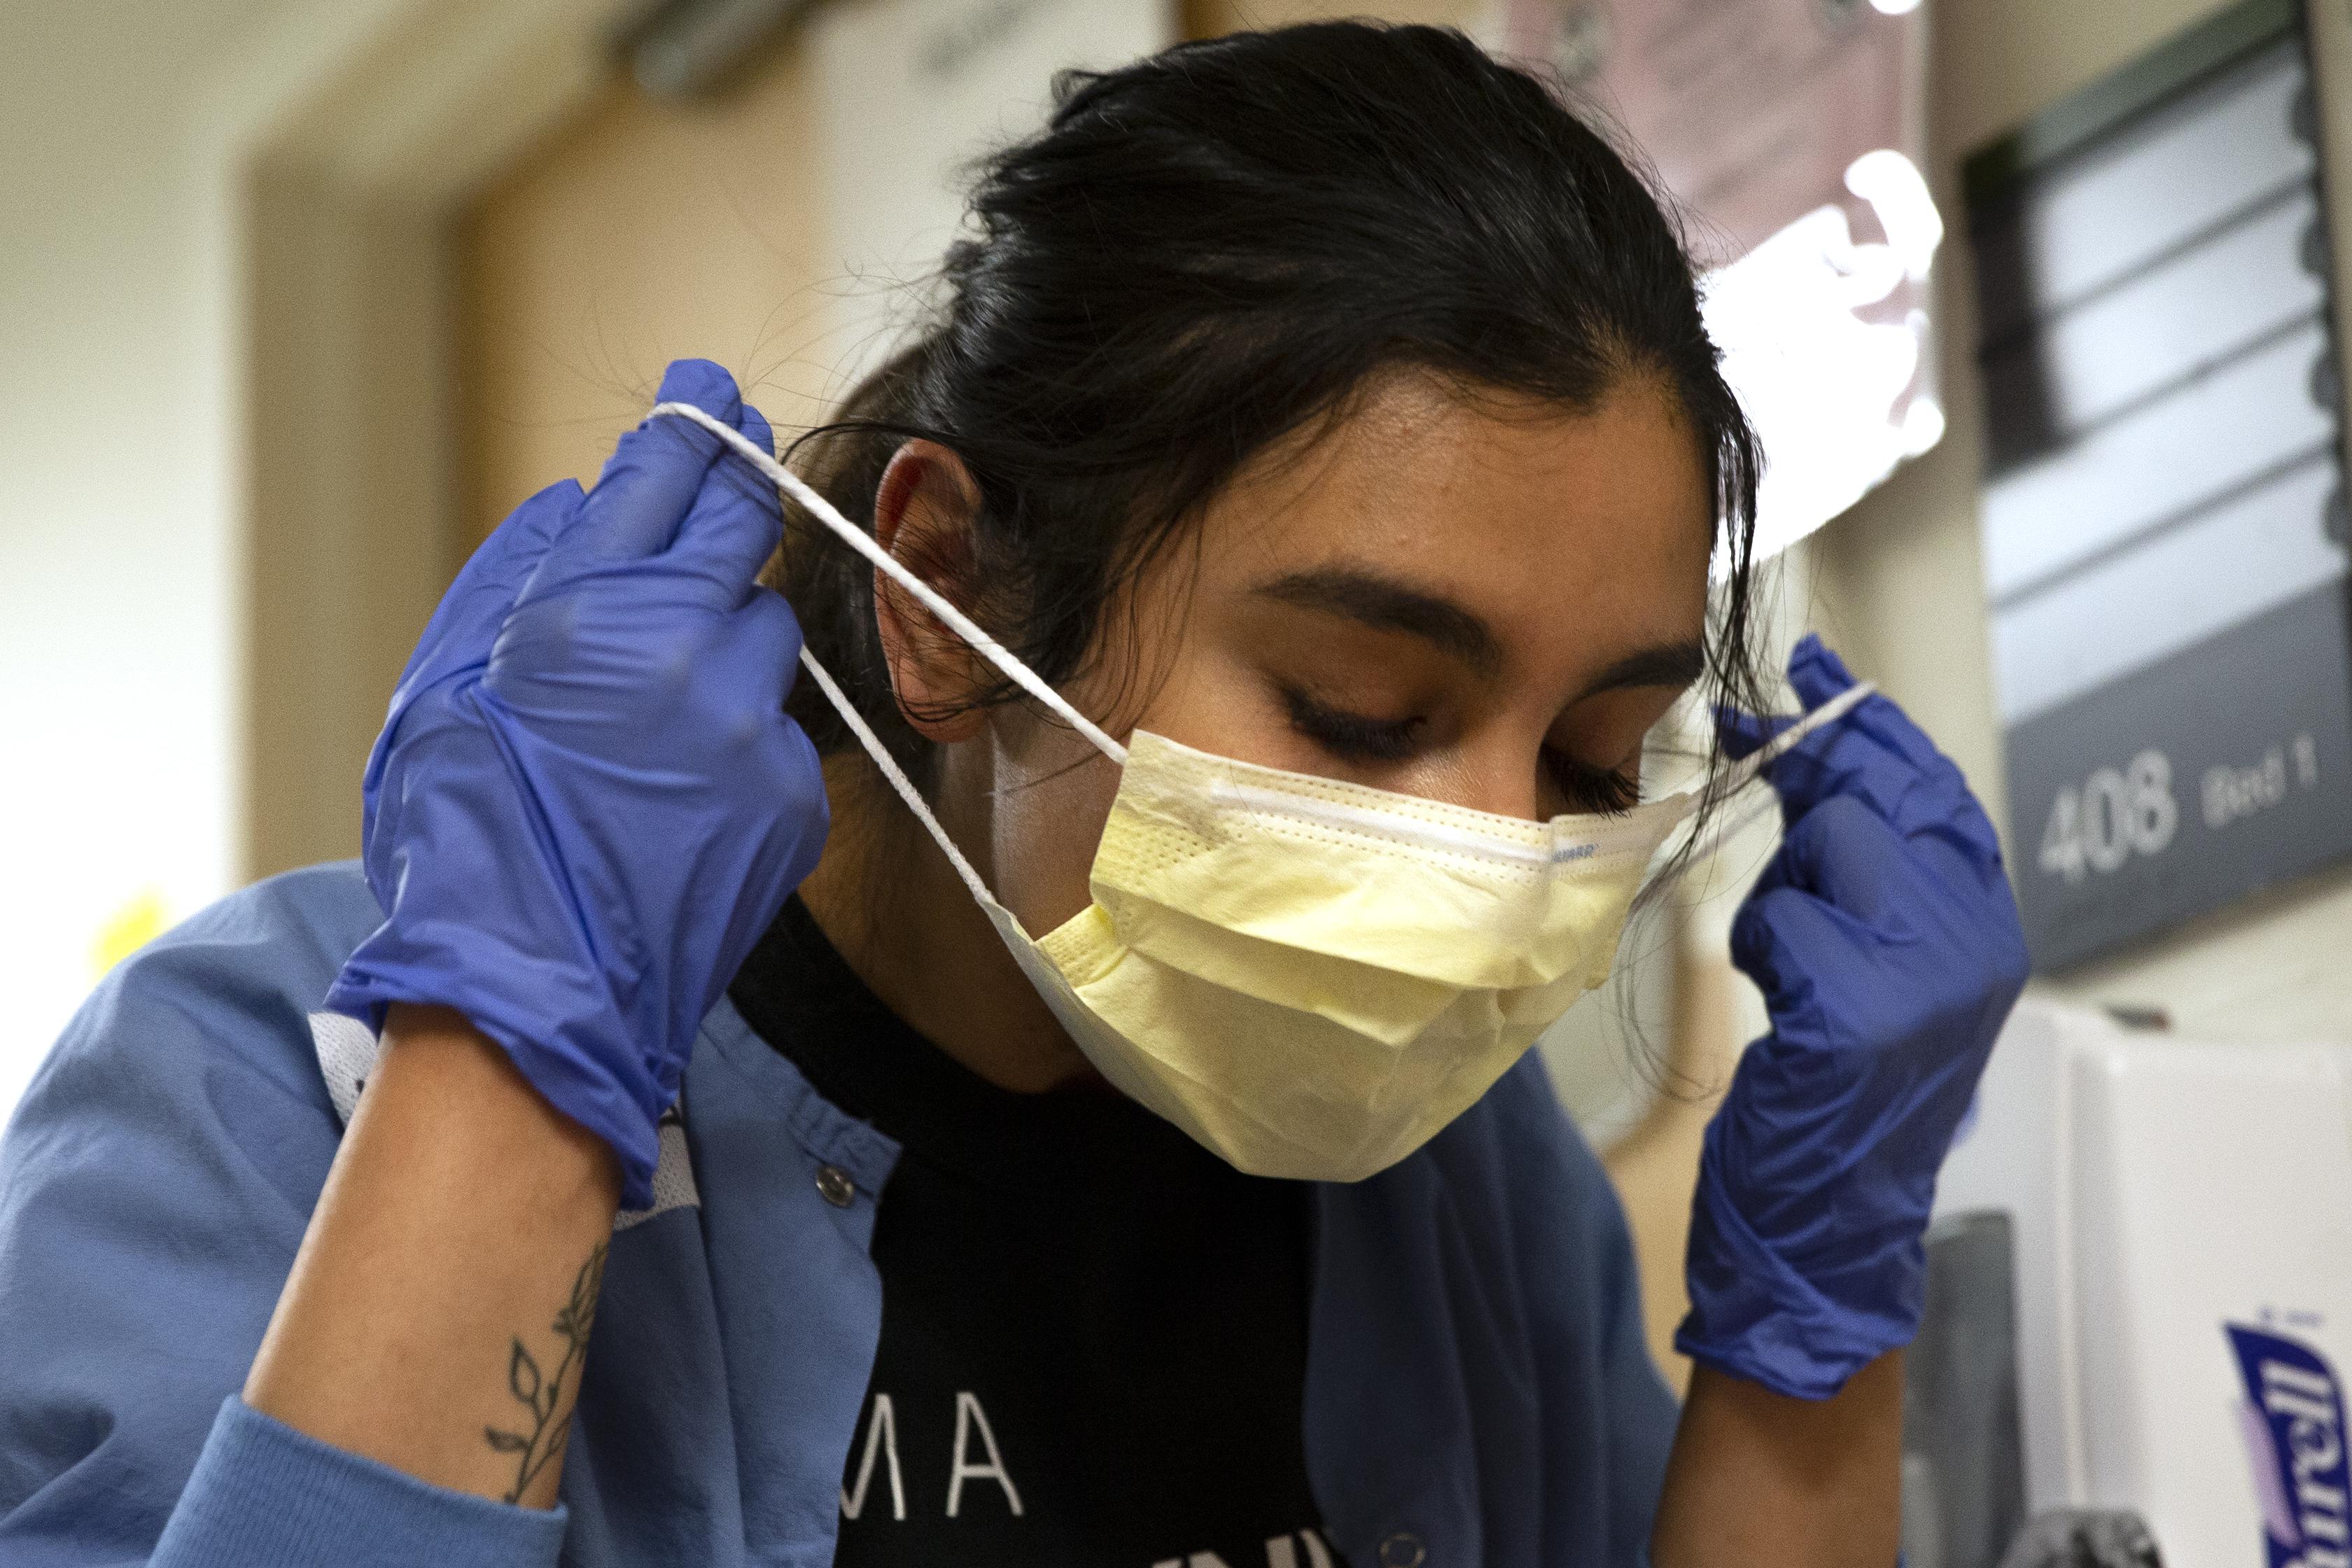 Charge nurse Liliana Palacios carefully removes her mask and PPE after tending to a patient with COVID-19 in the acute care COVID unit at Harborview Medical Center on May 7, 2020 in Seattle, Washington. 